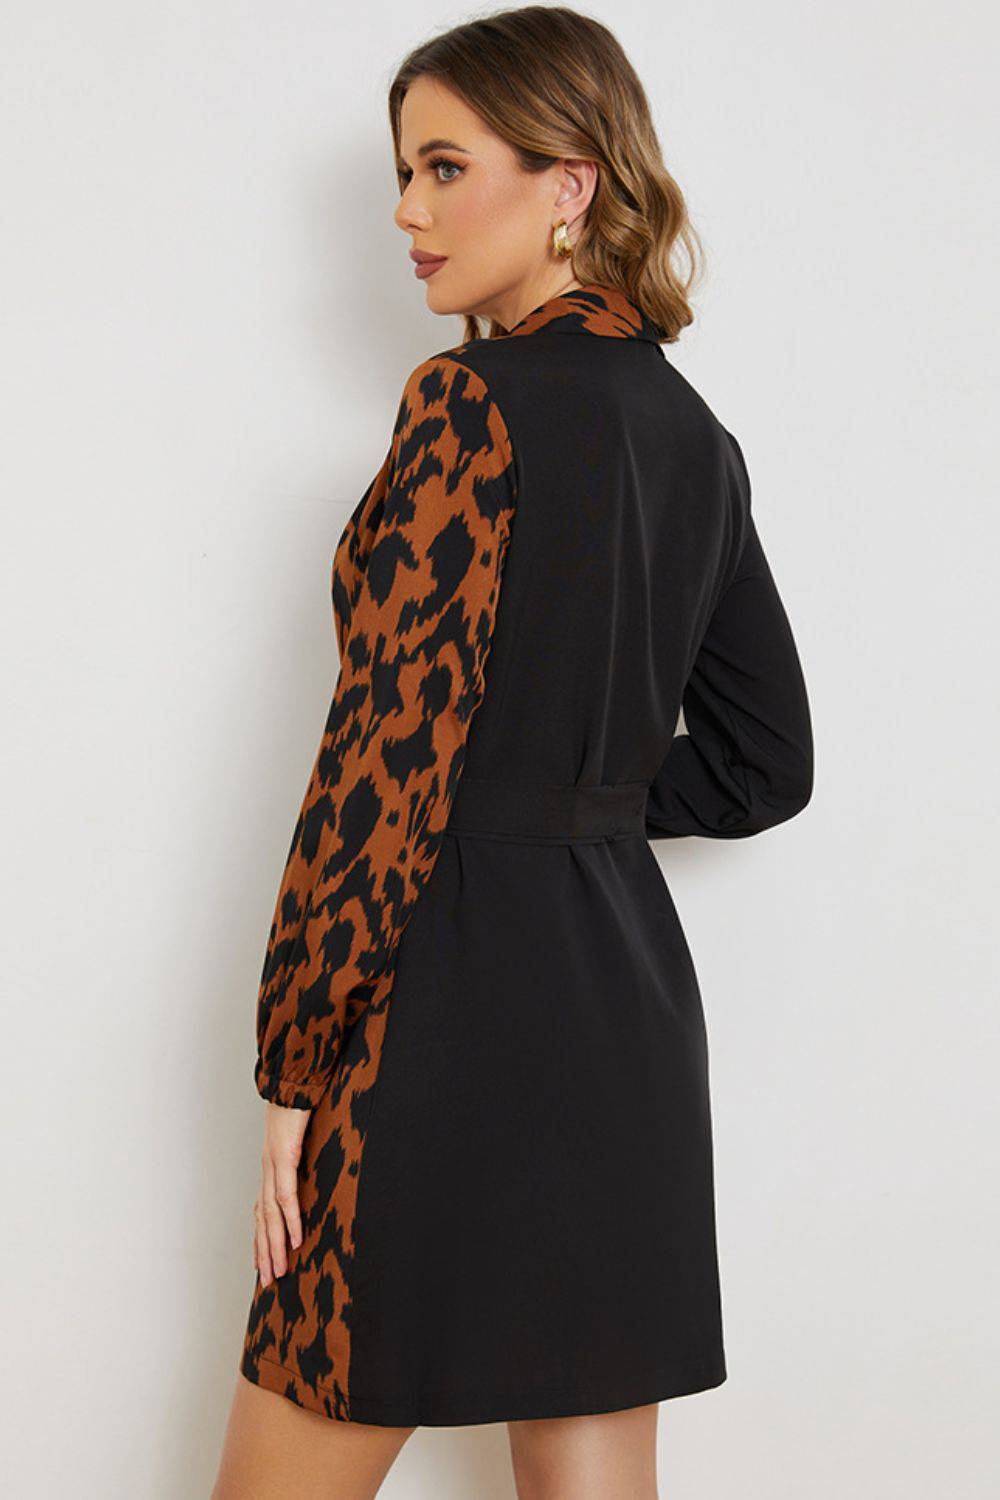 "Leopard Color Block Belted Shawl Collar Dress - Reignite Your Passion and Unleash Your Inner Queen with This Hypnotic Masterpiece" - Guy Christopher